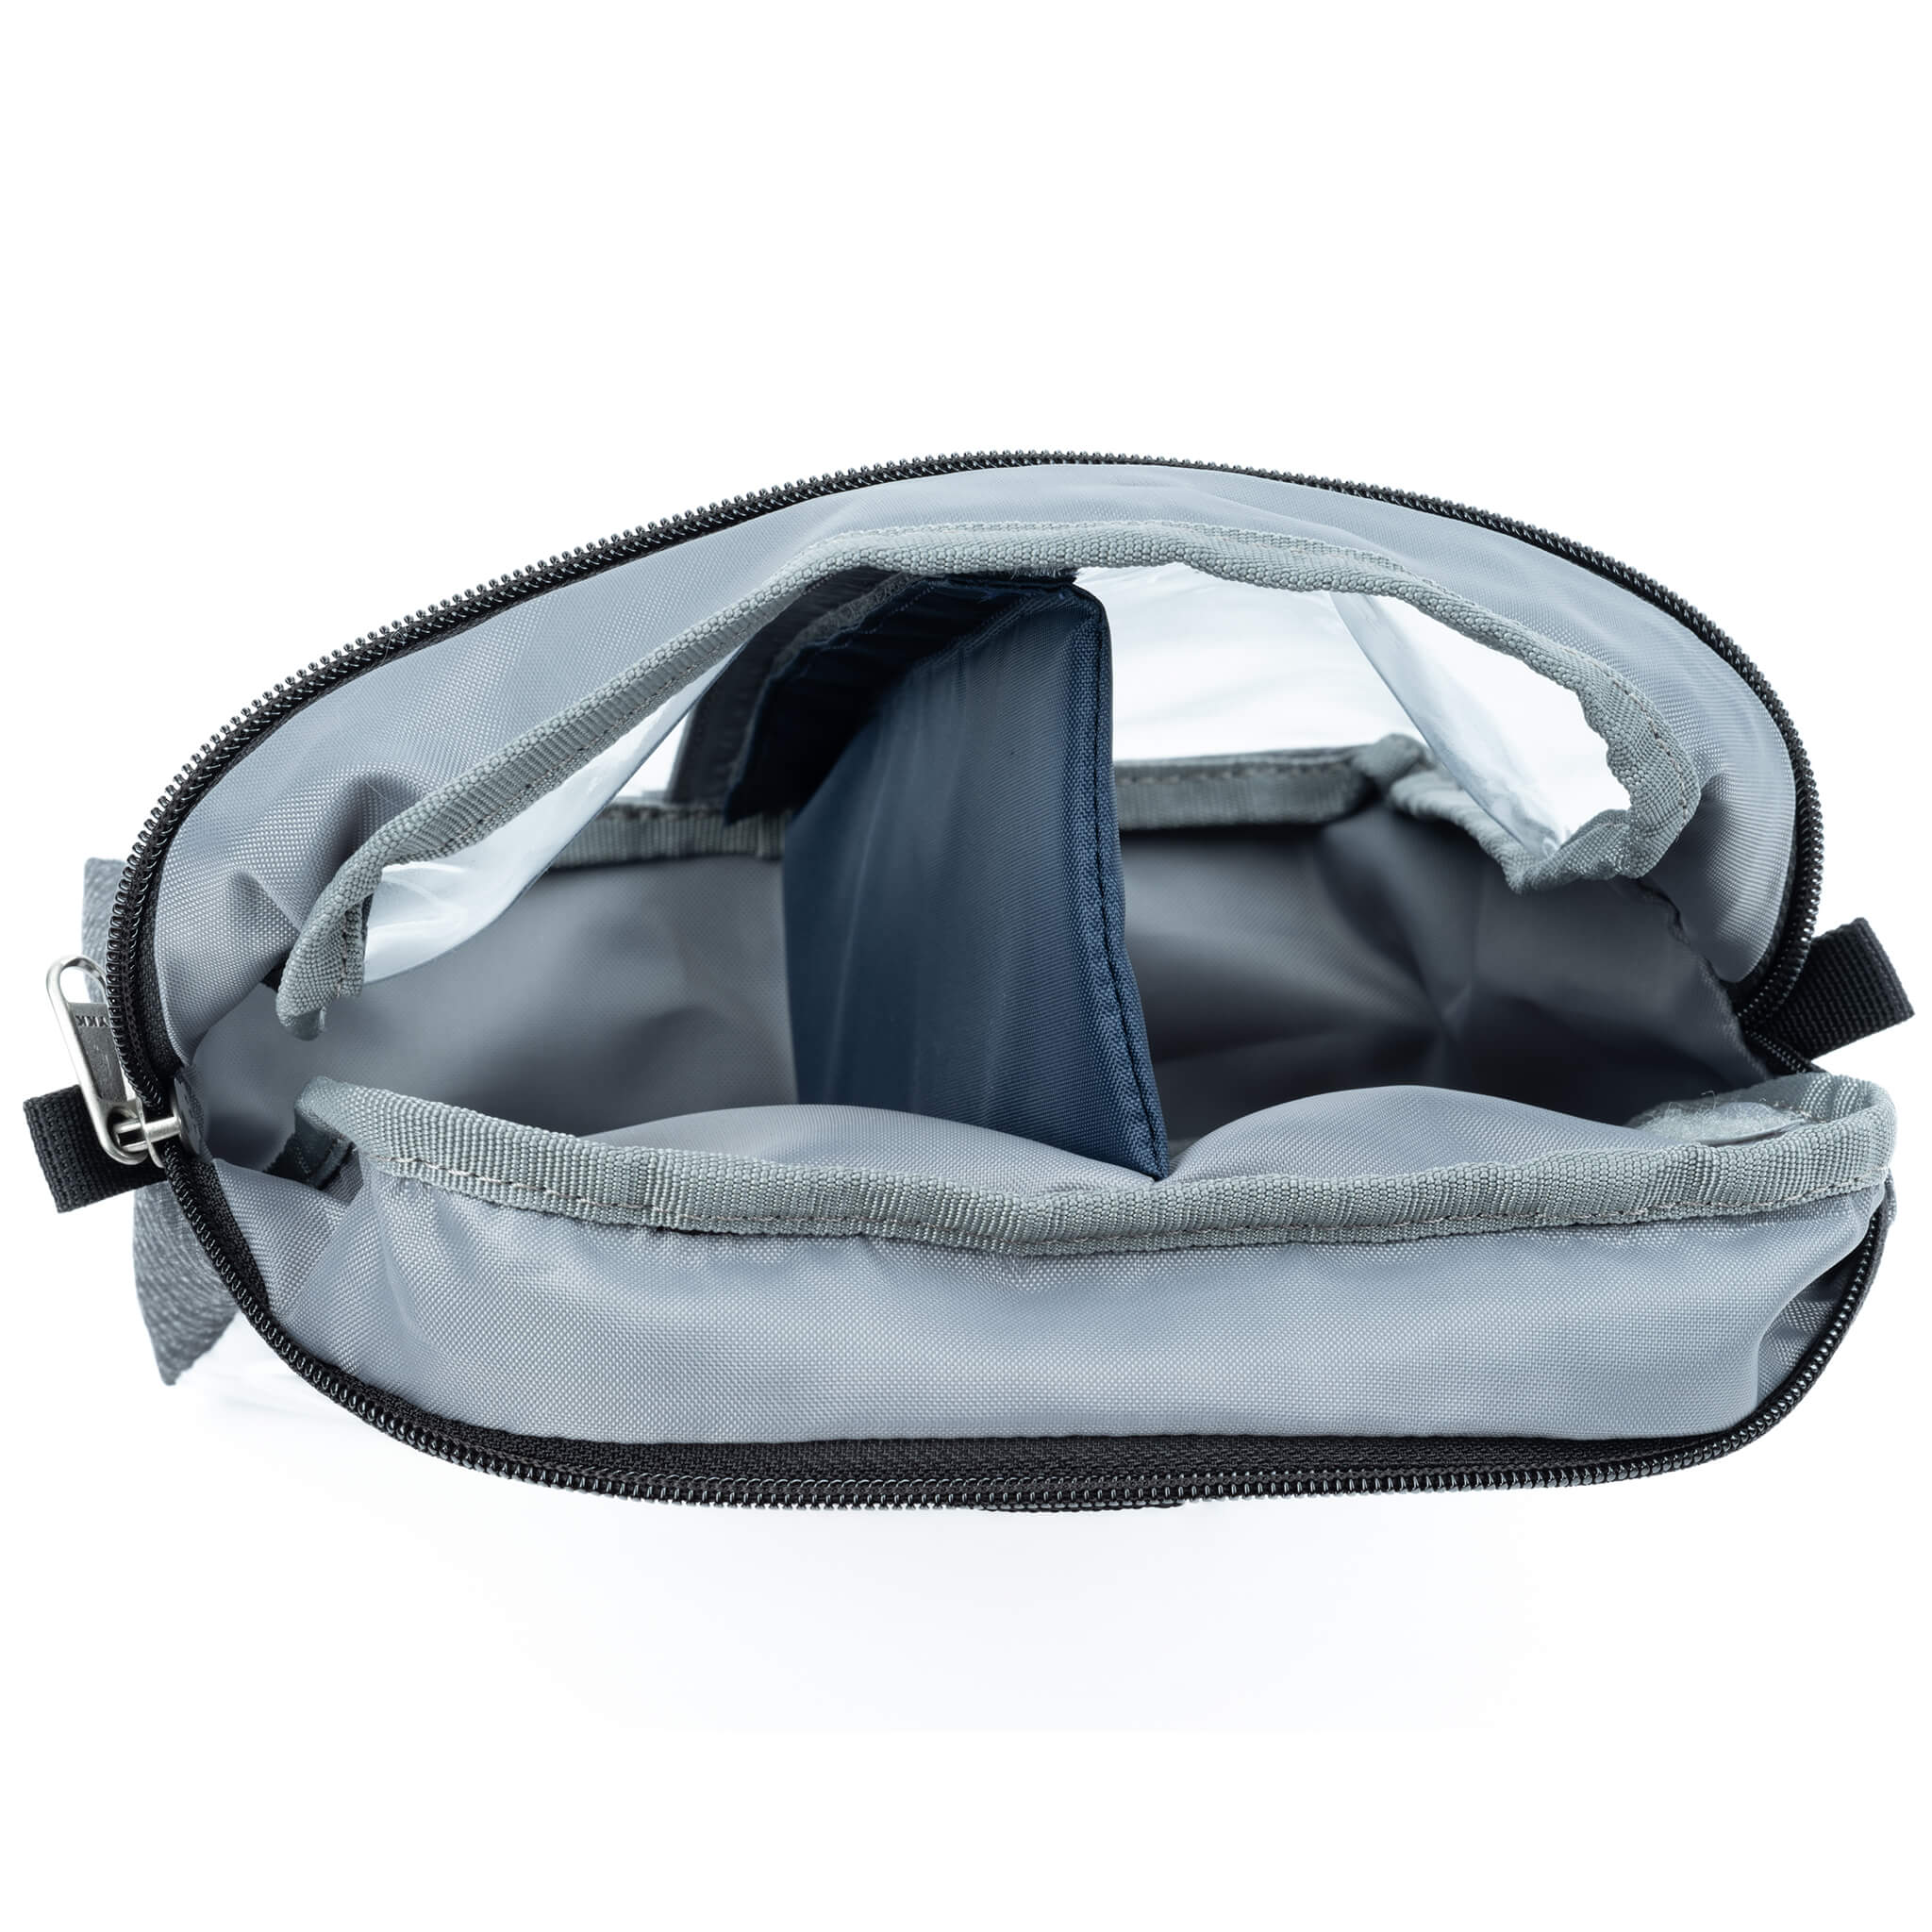 Wide opening, zippered top provides rapid access to contents